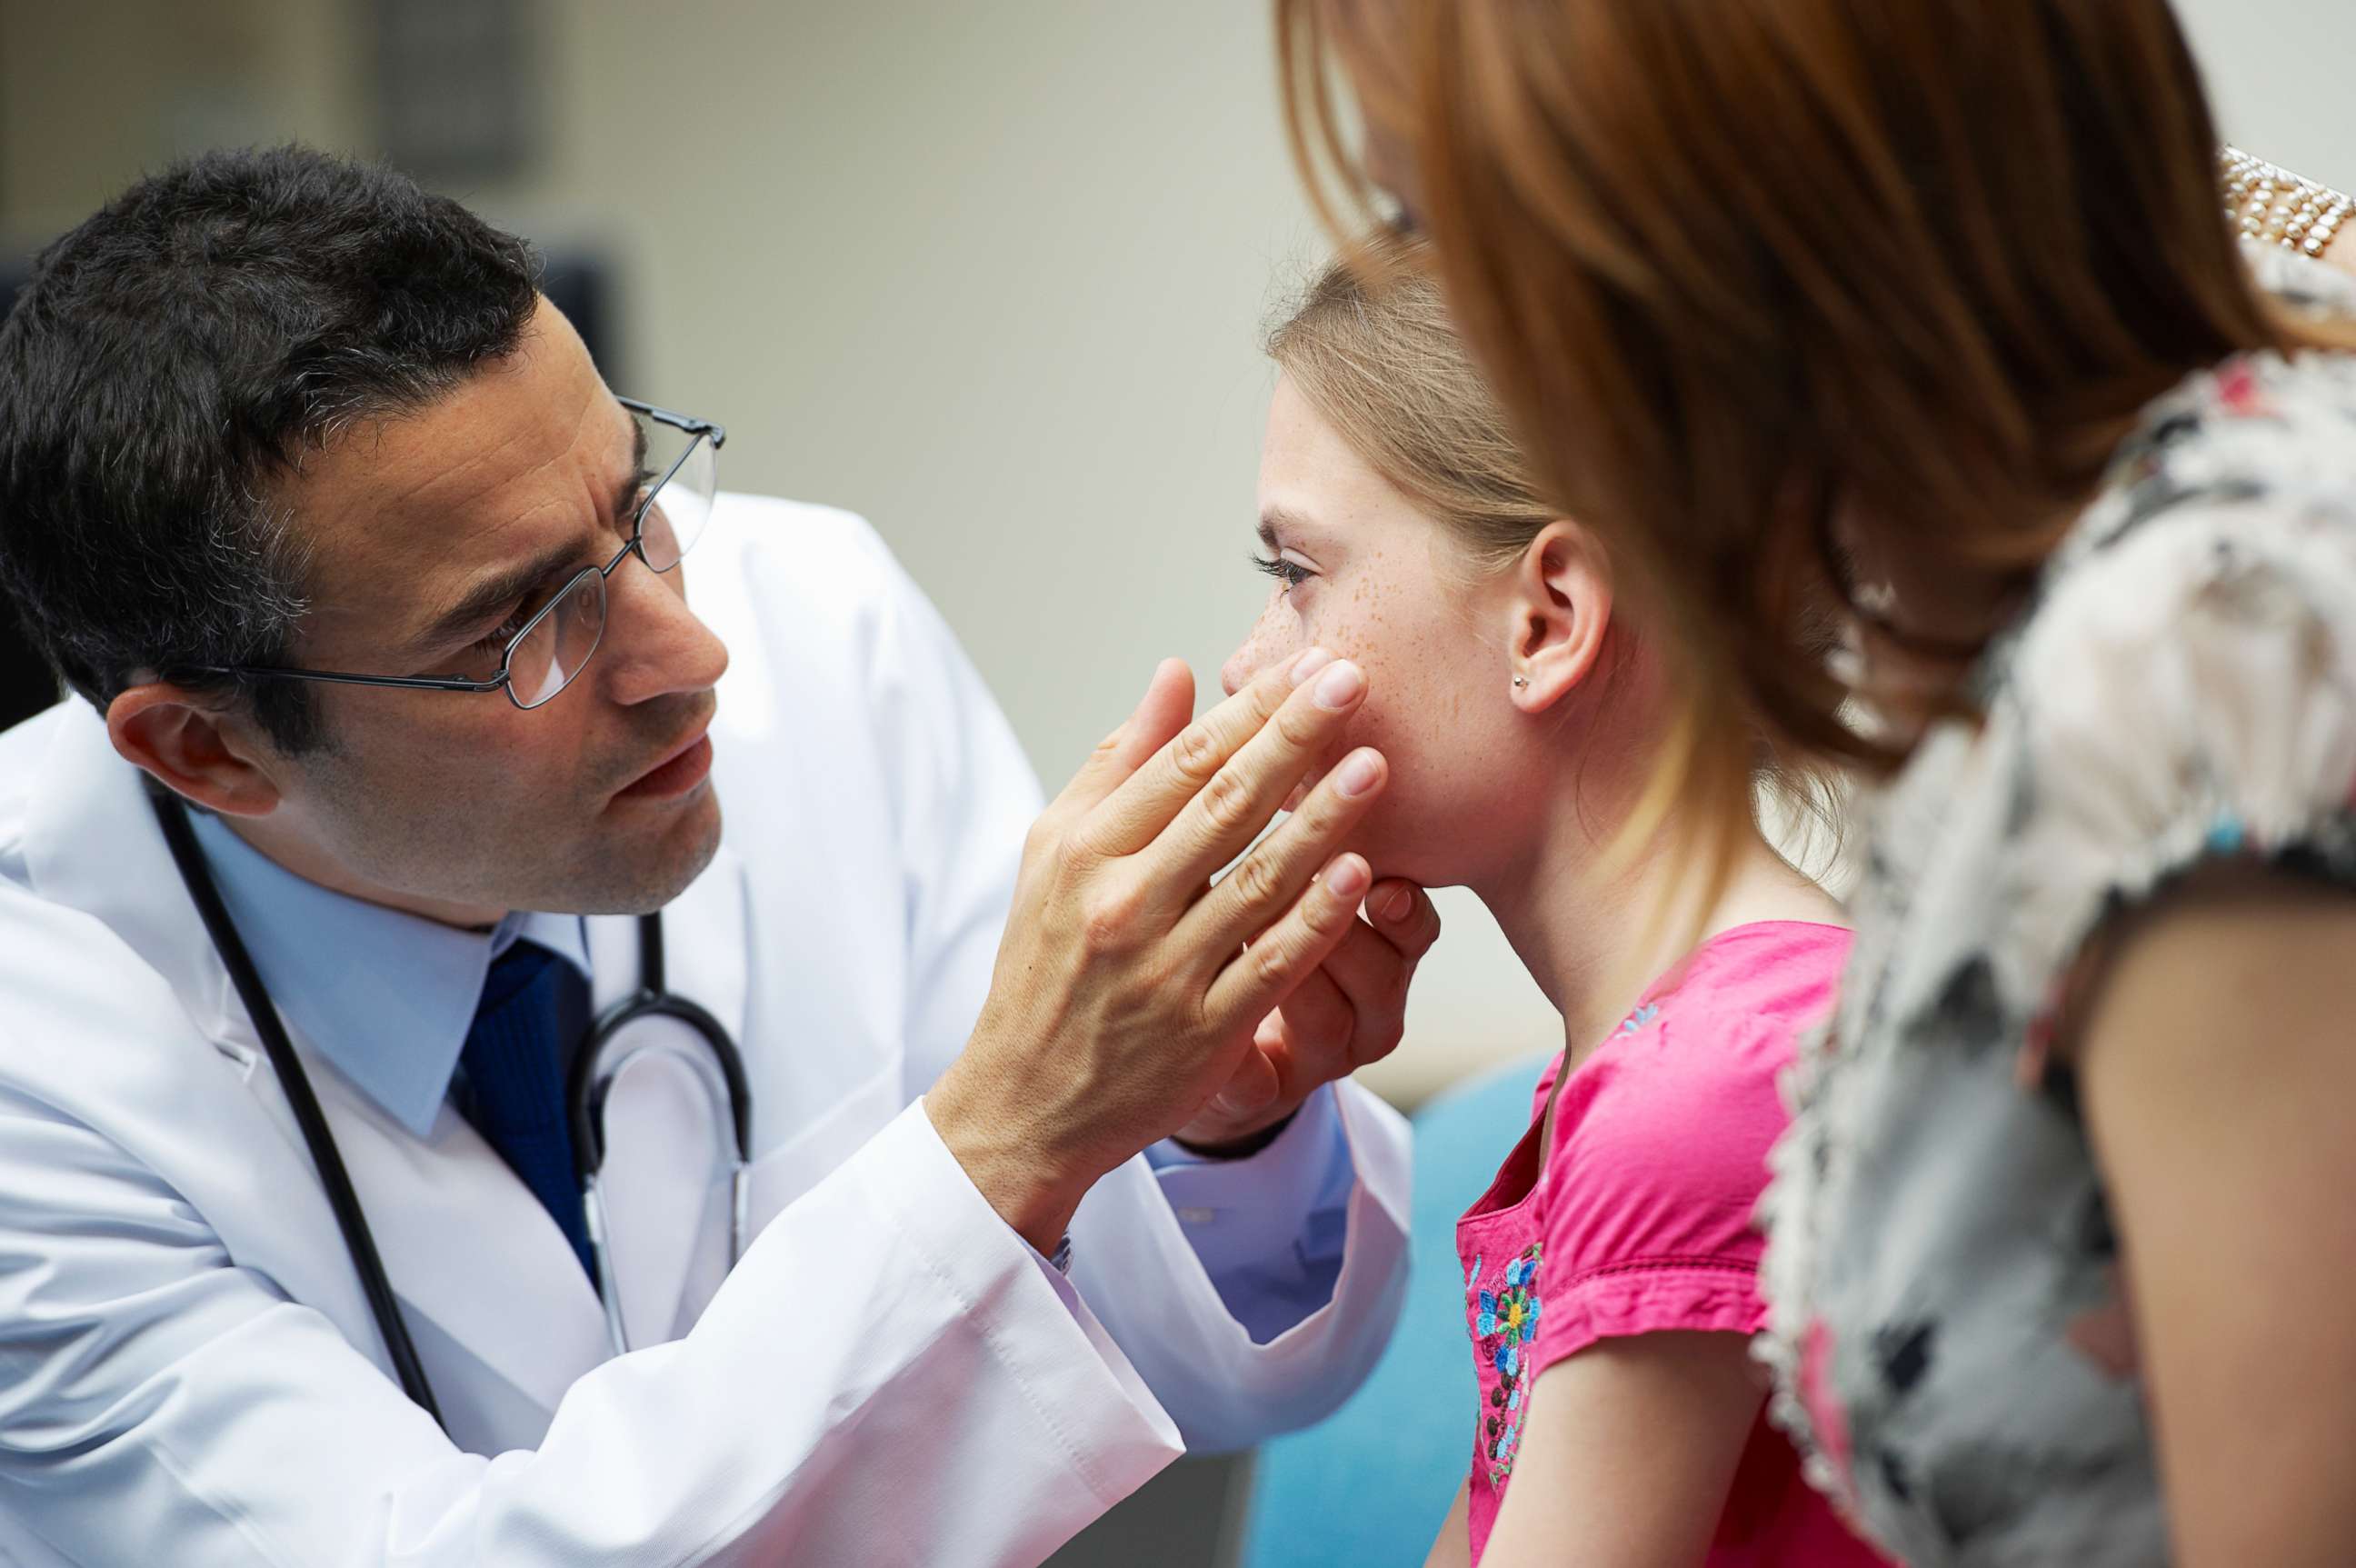 PHOTO: A pediatrician check a child in this stock photo.